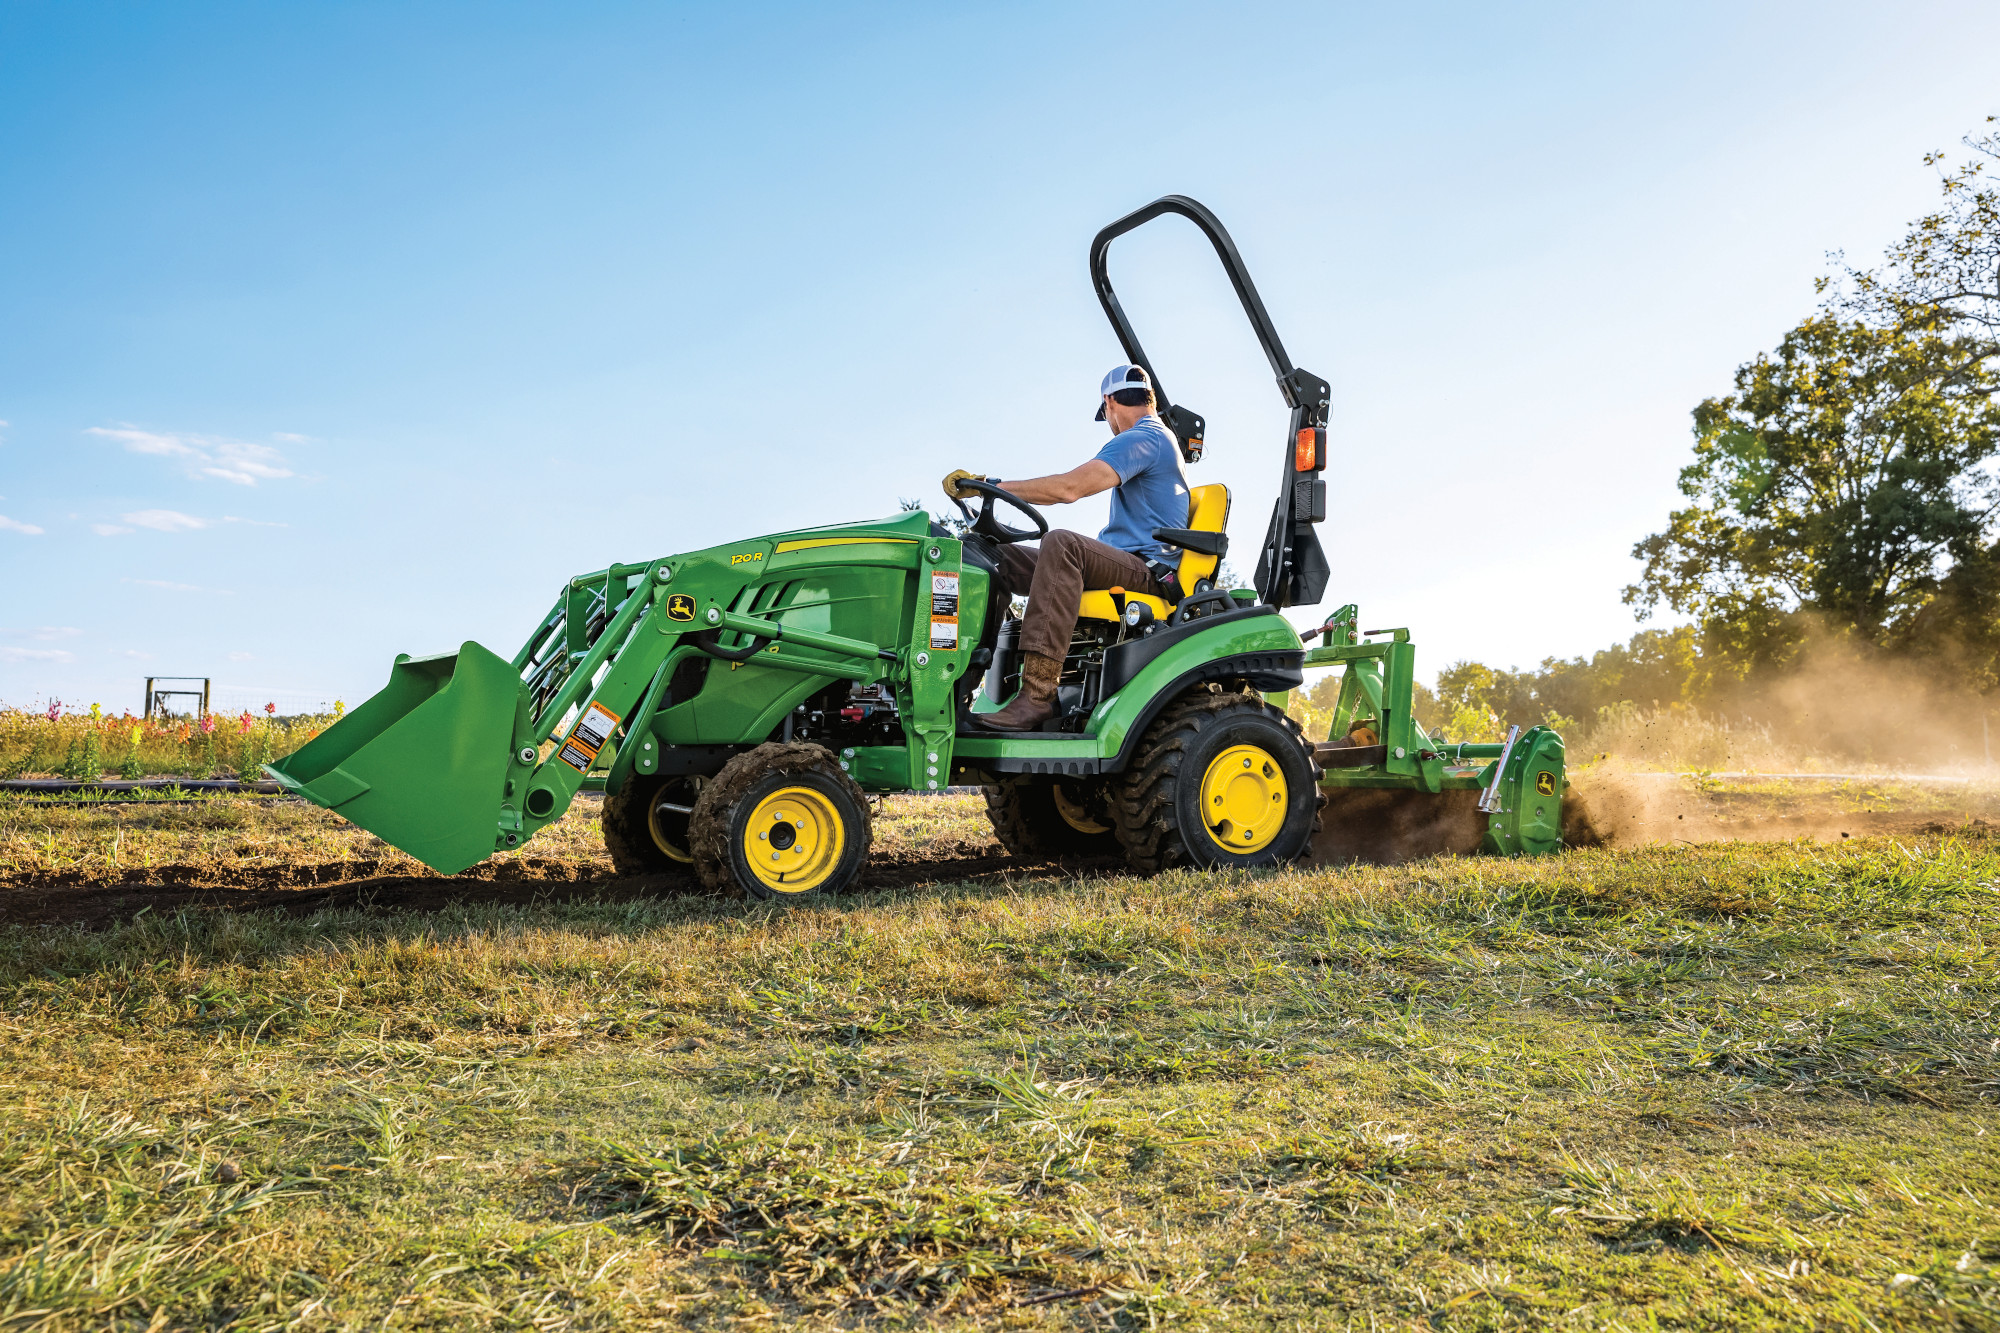 Which John Deere Compact Utility Tractor is right for you?